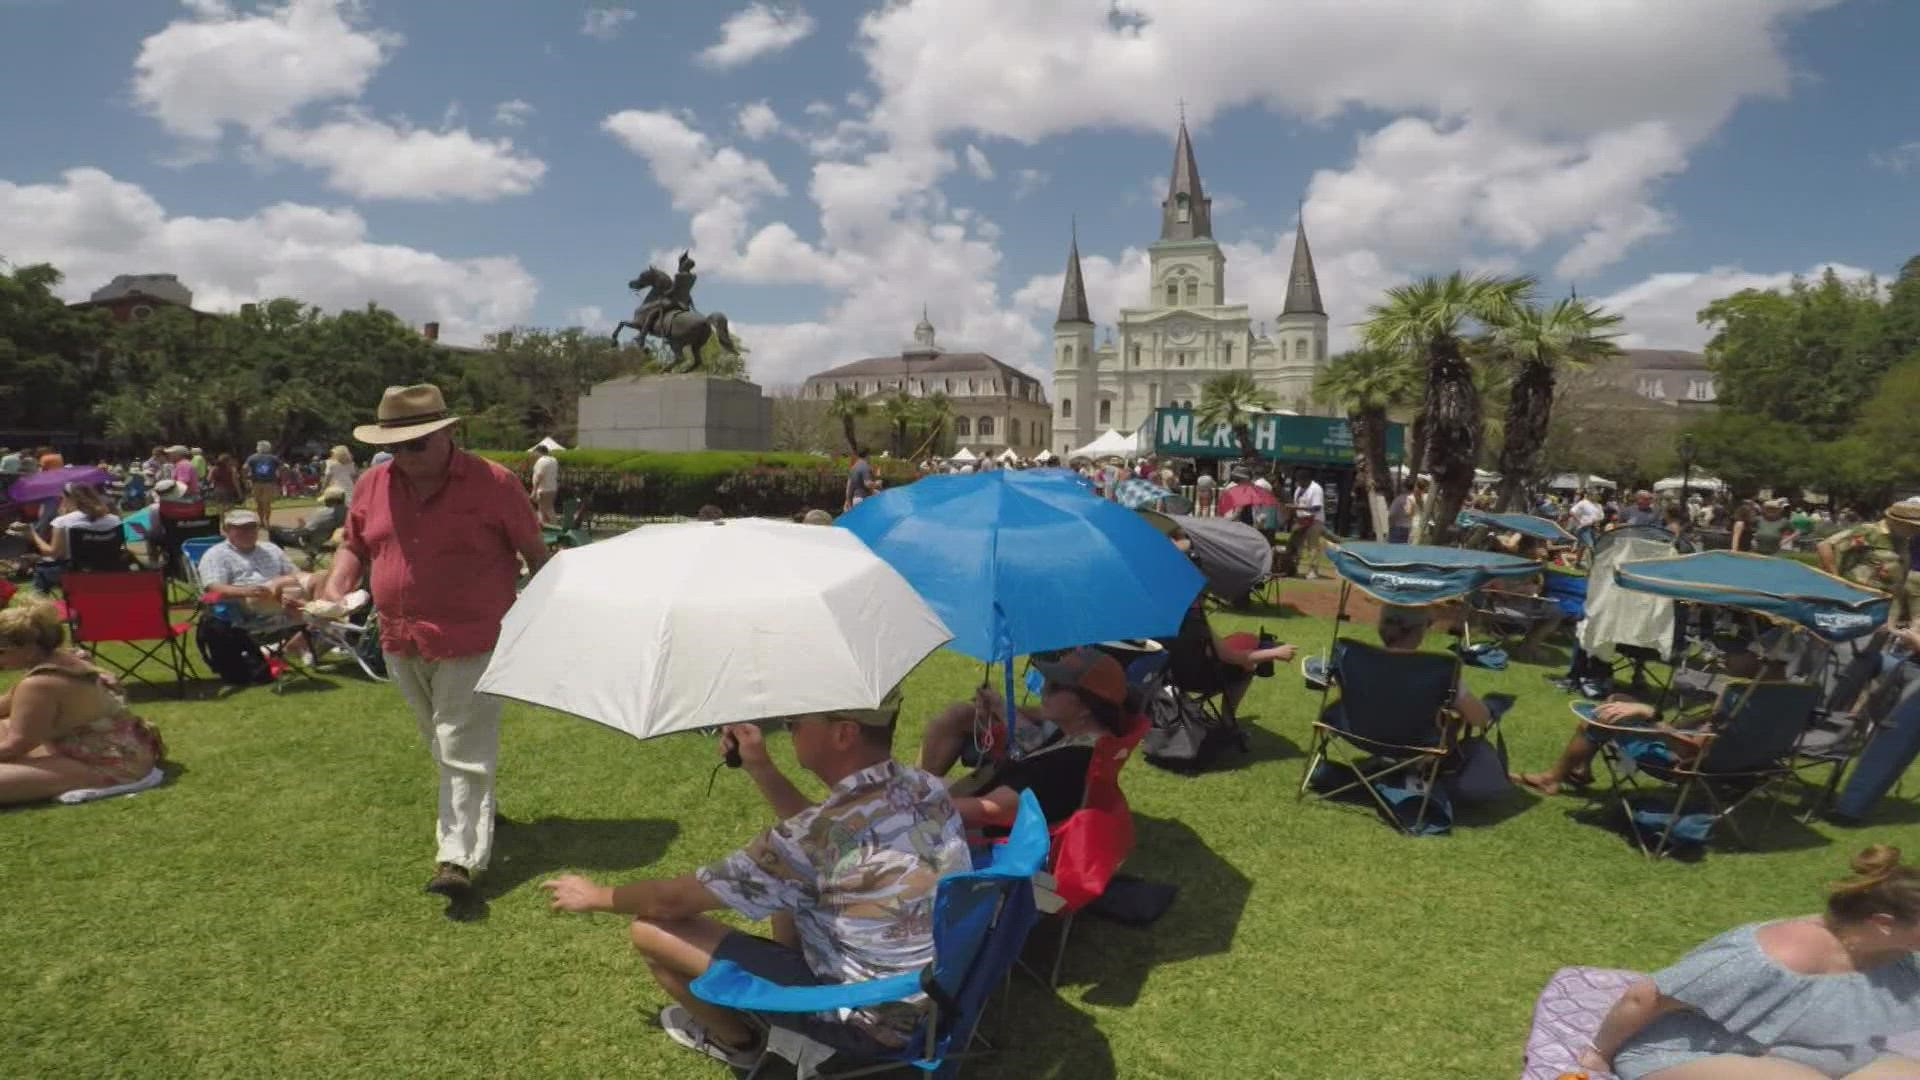 French Quarter Fest is in full effect with the music and food flowing and the fest-goers filing into the city.